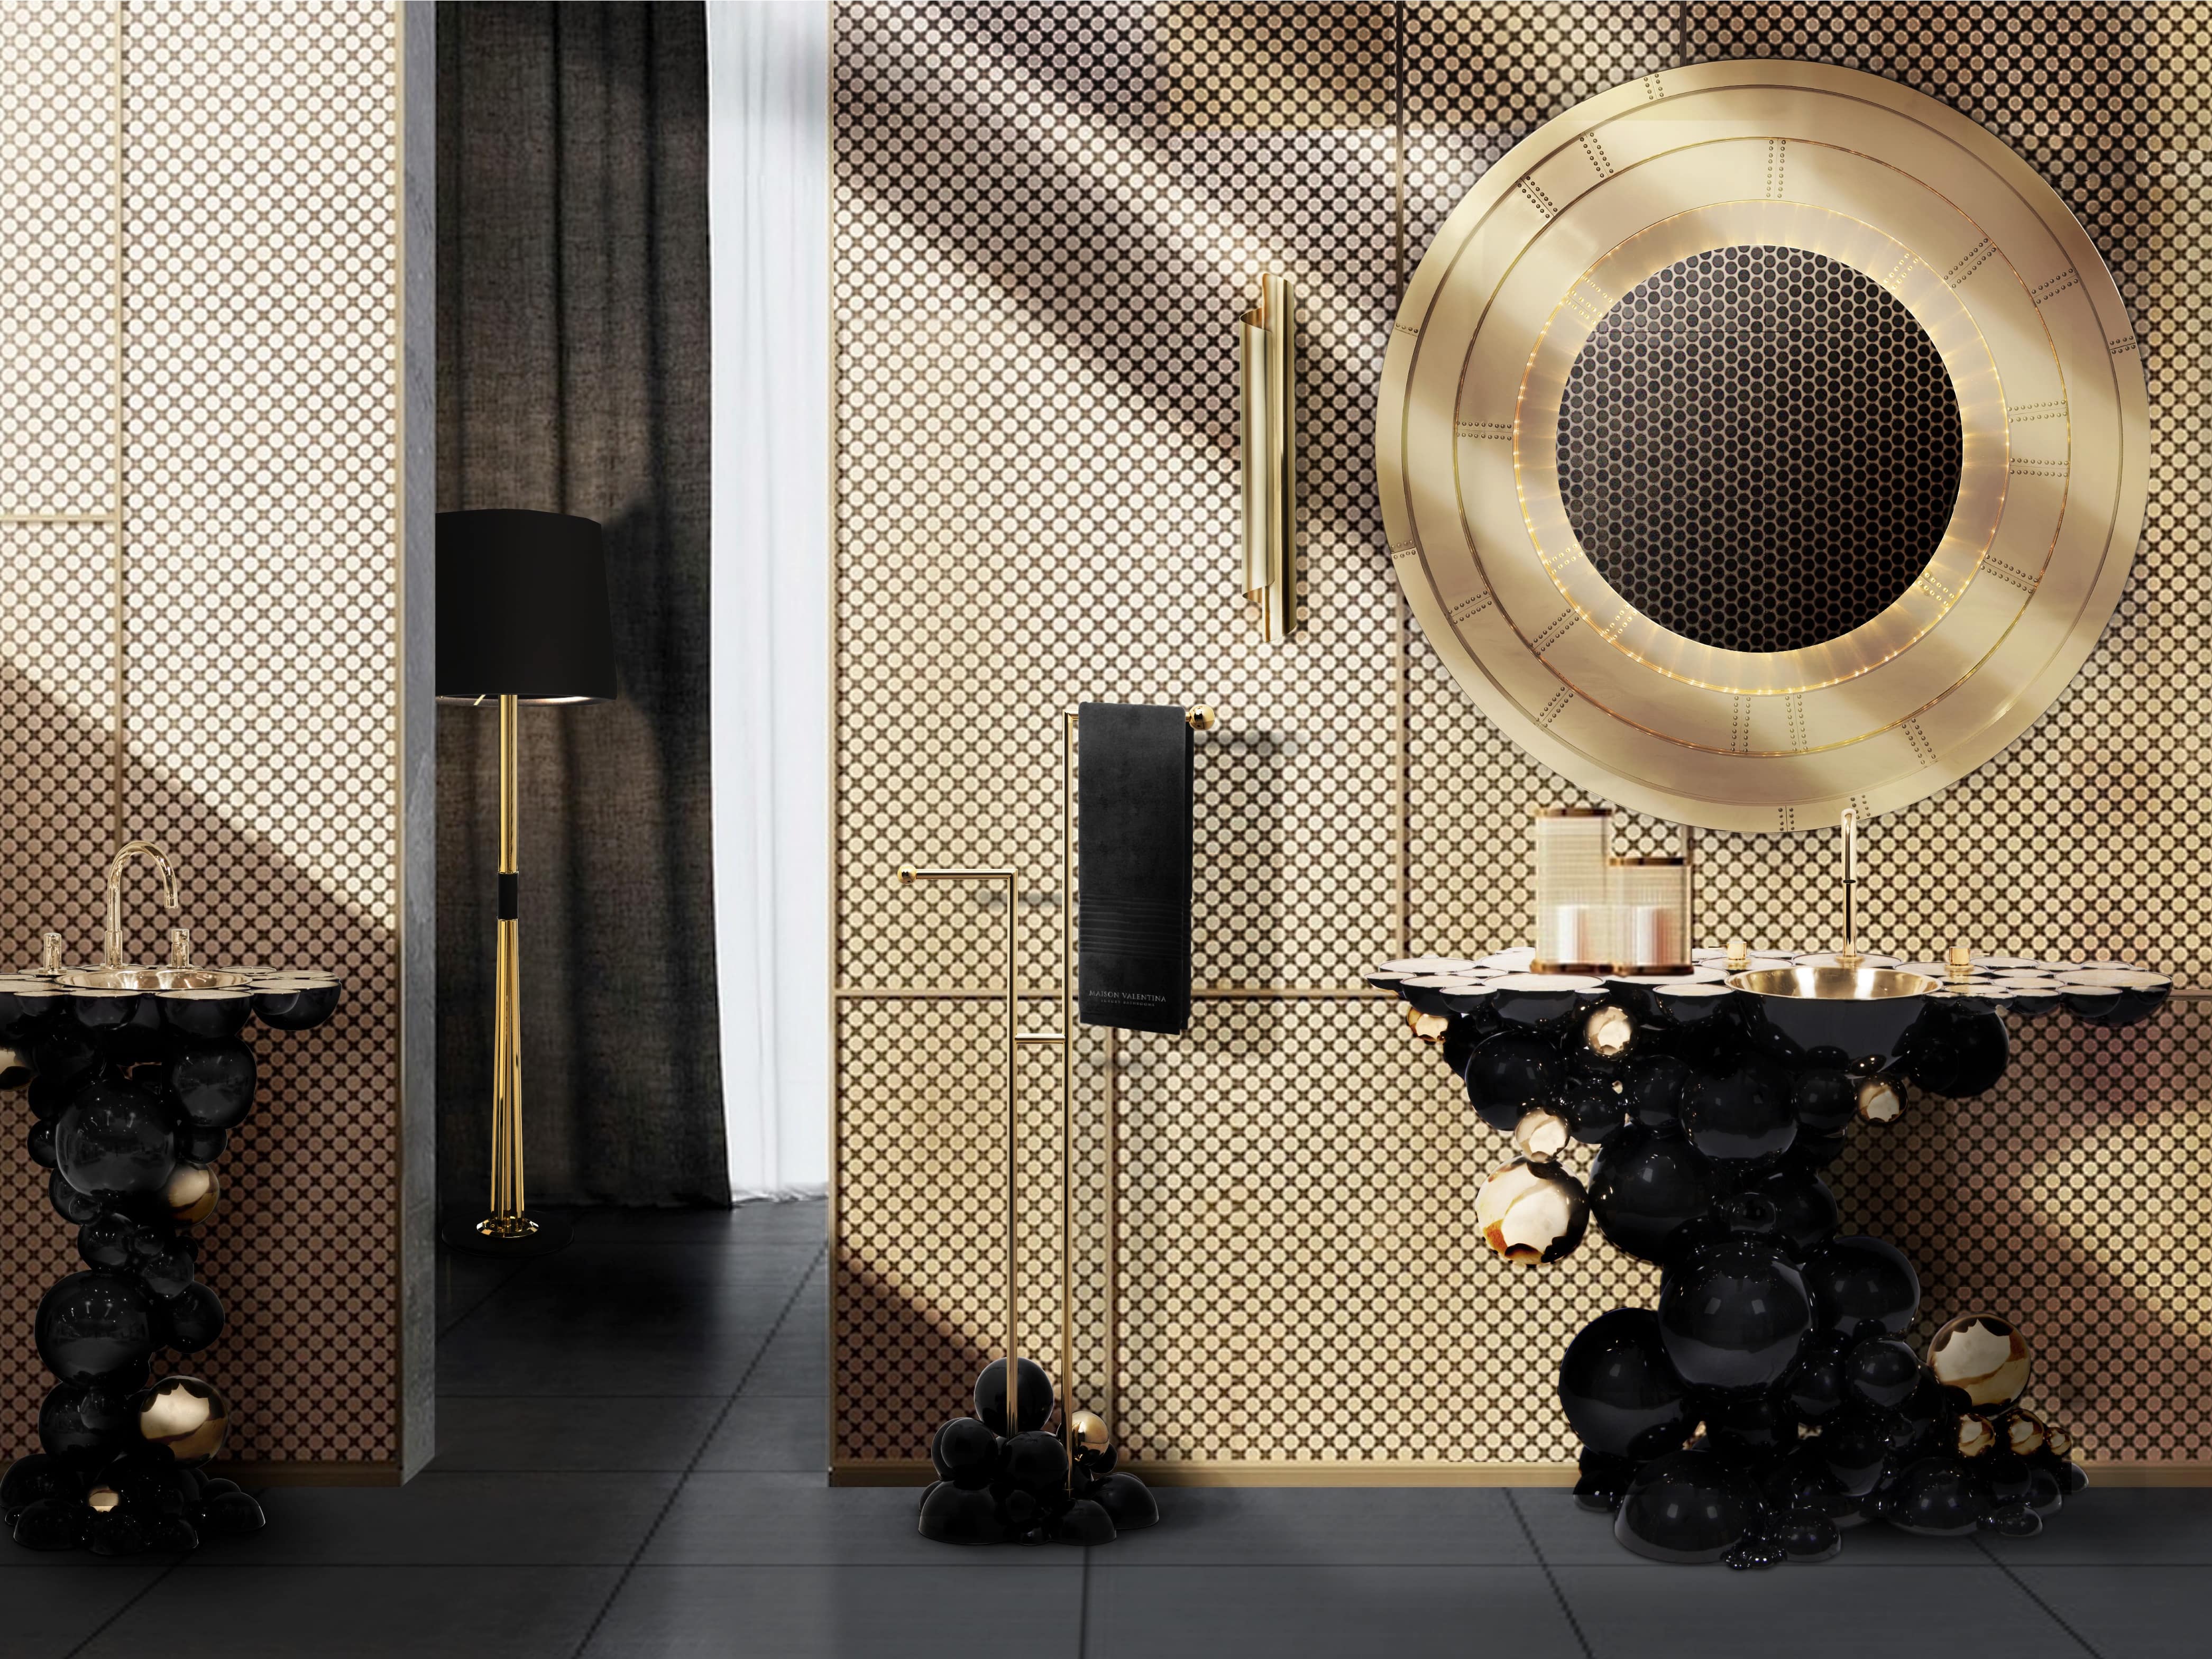 A Blissfuly Unique Black and Gold Bathroom Design - Home'Society